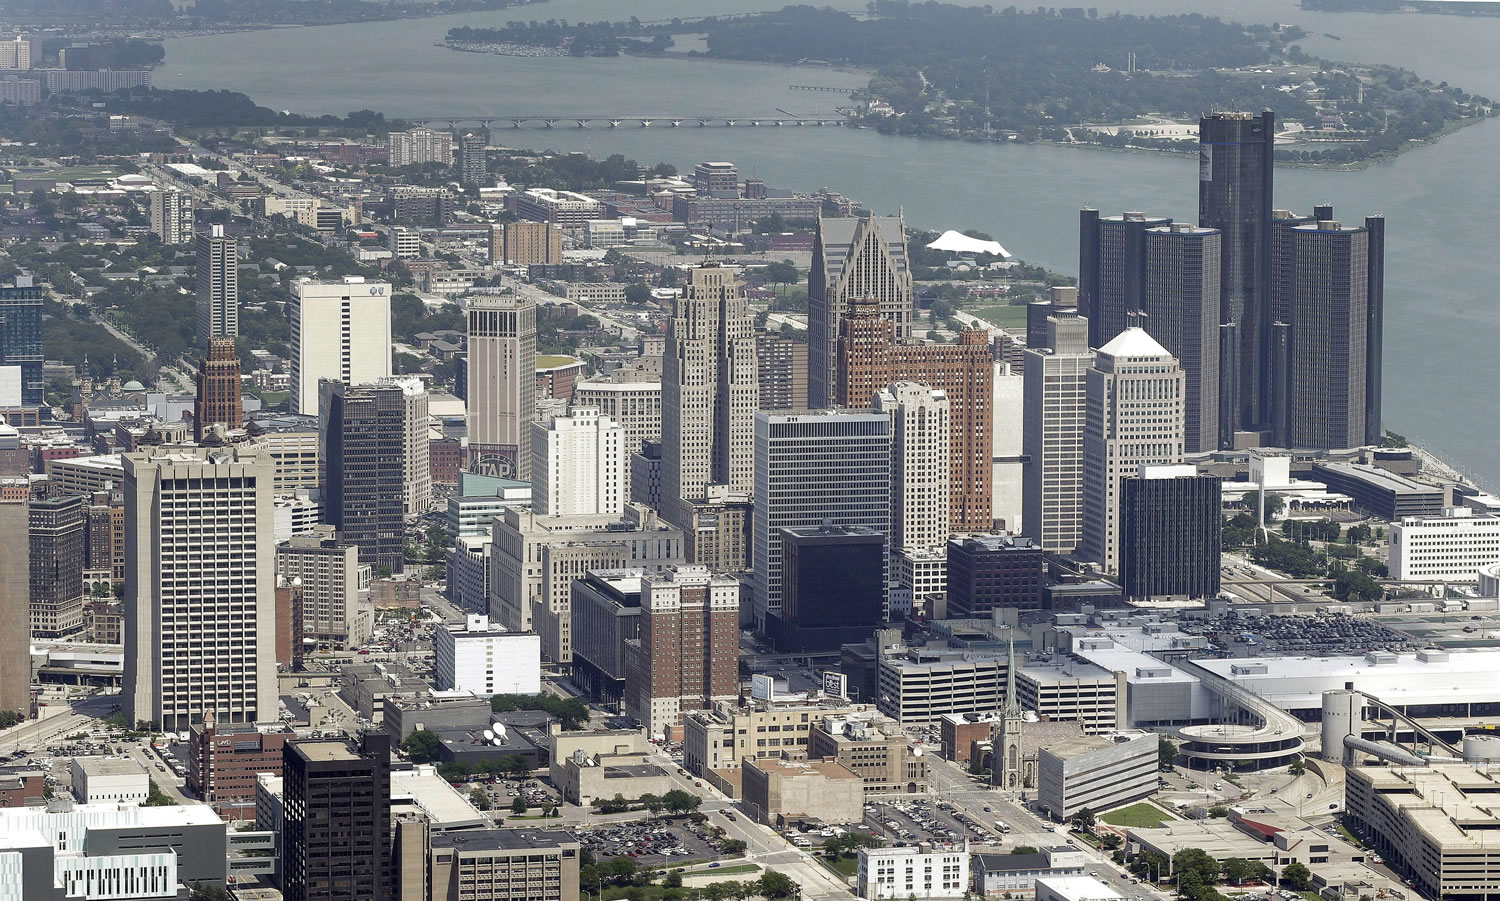 The downtown area of the city of Detroit.